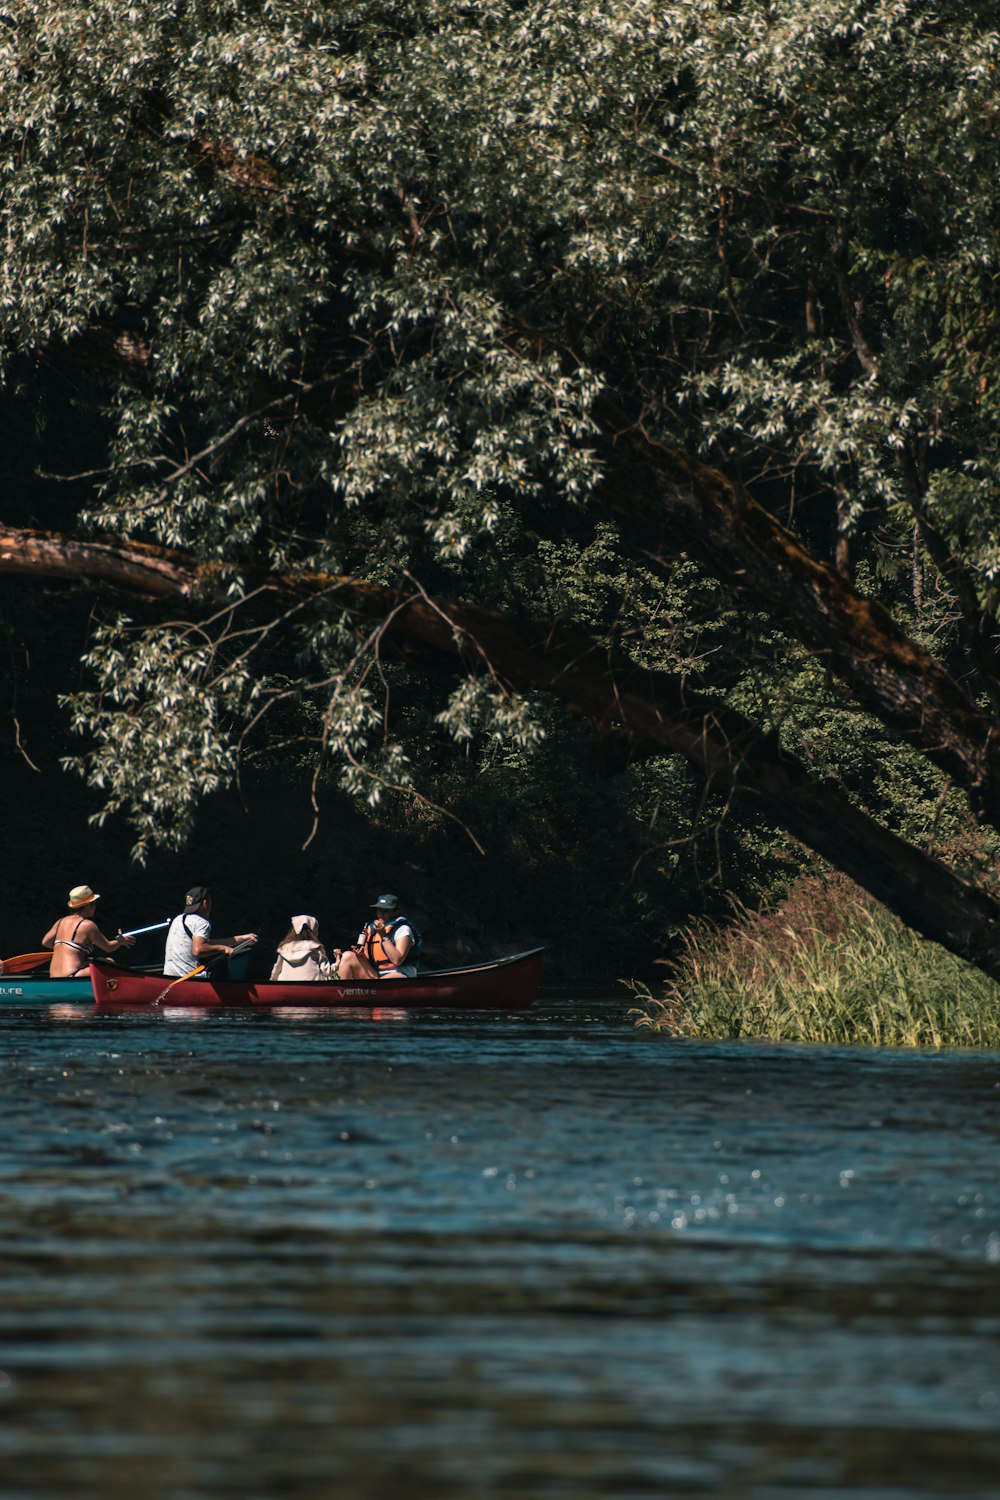 a group of people in a canoe on a river